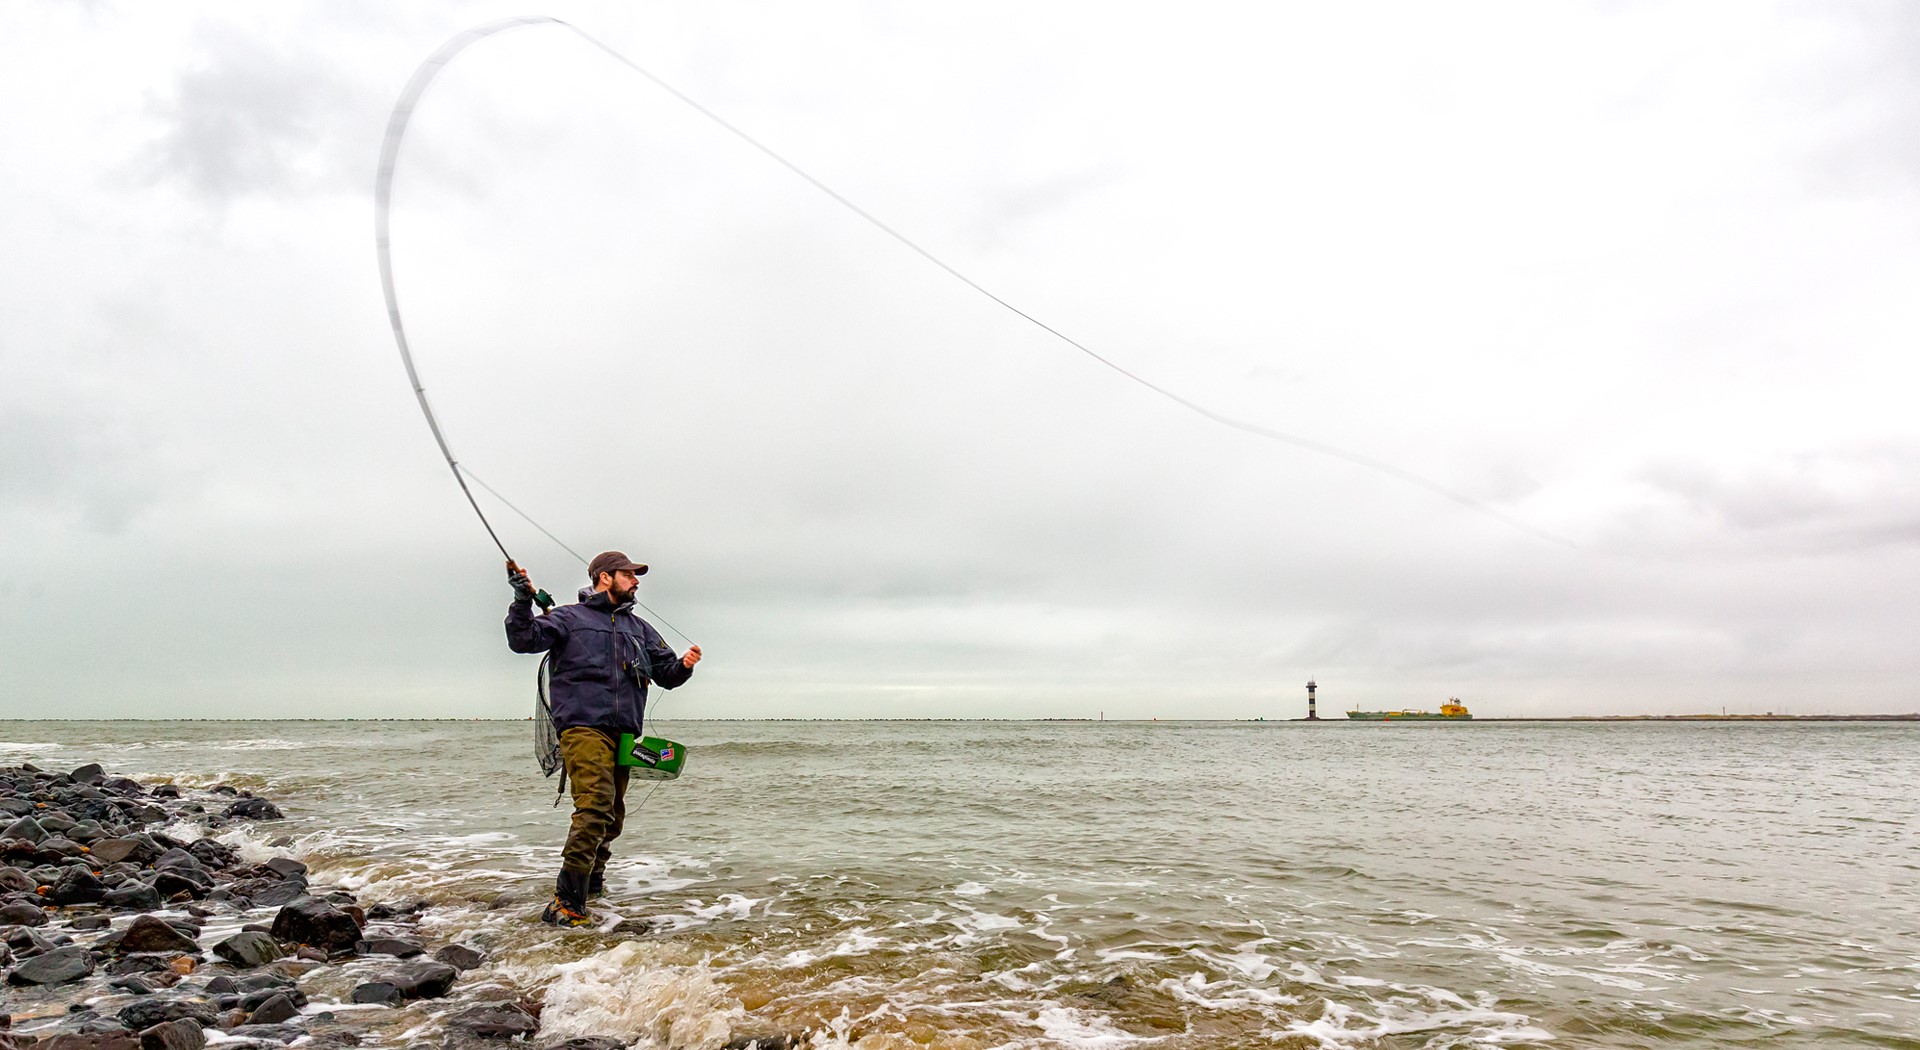 Fly fishing for seabass